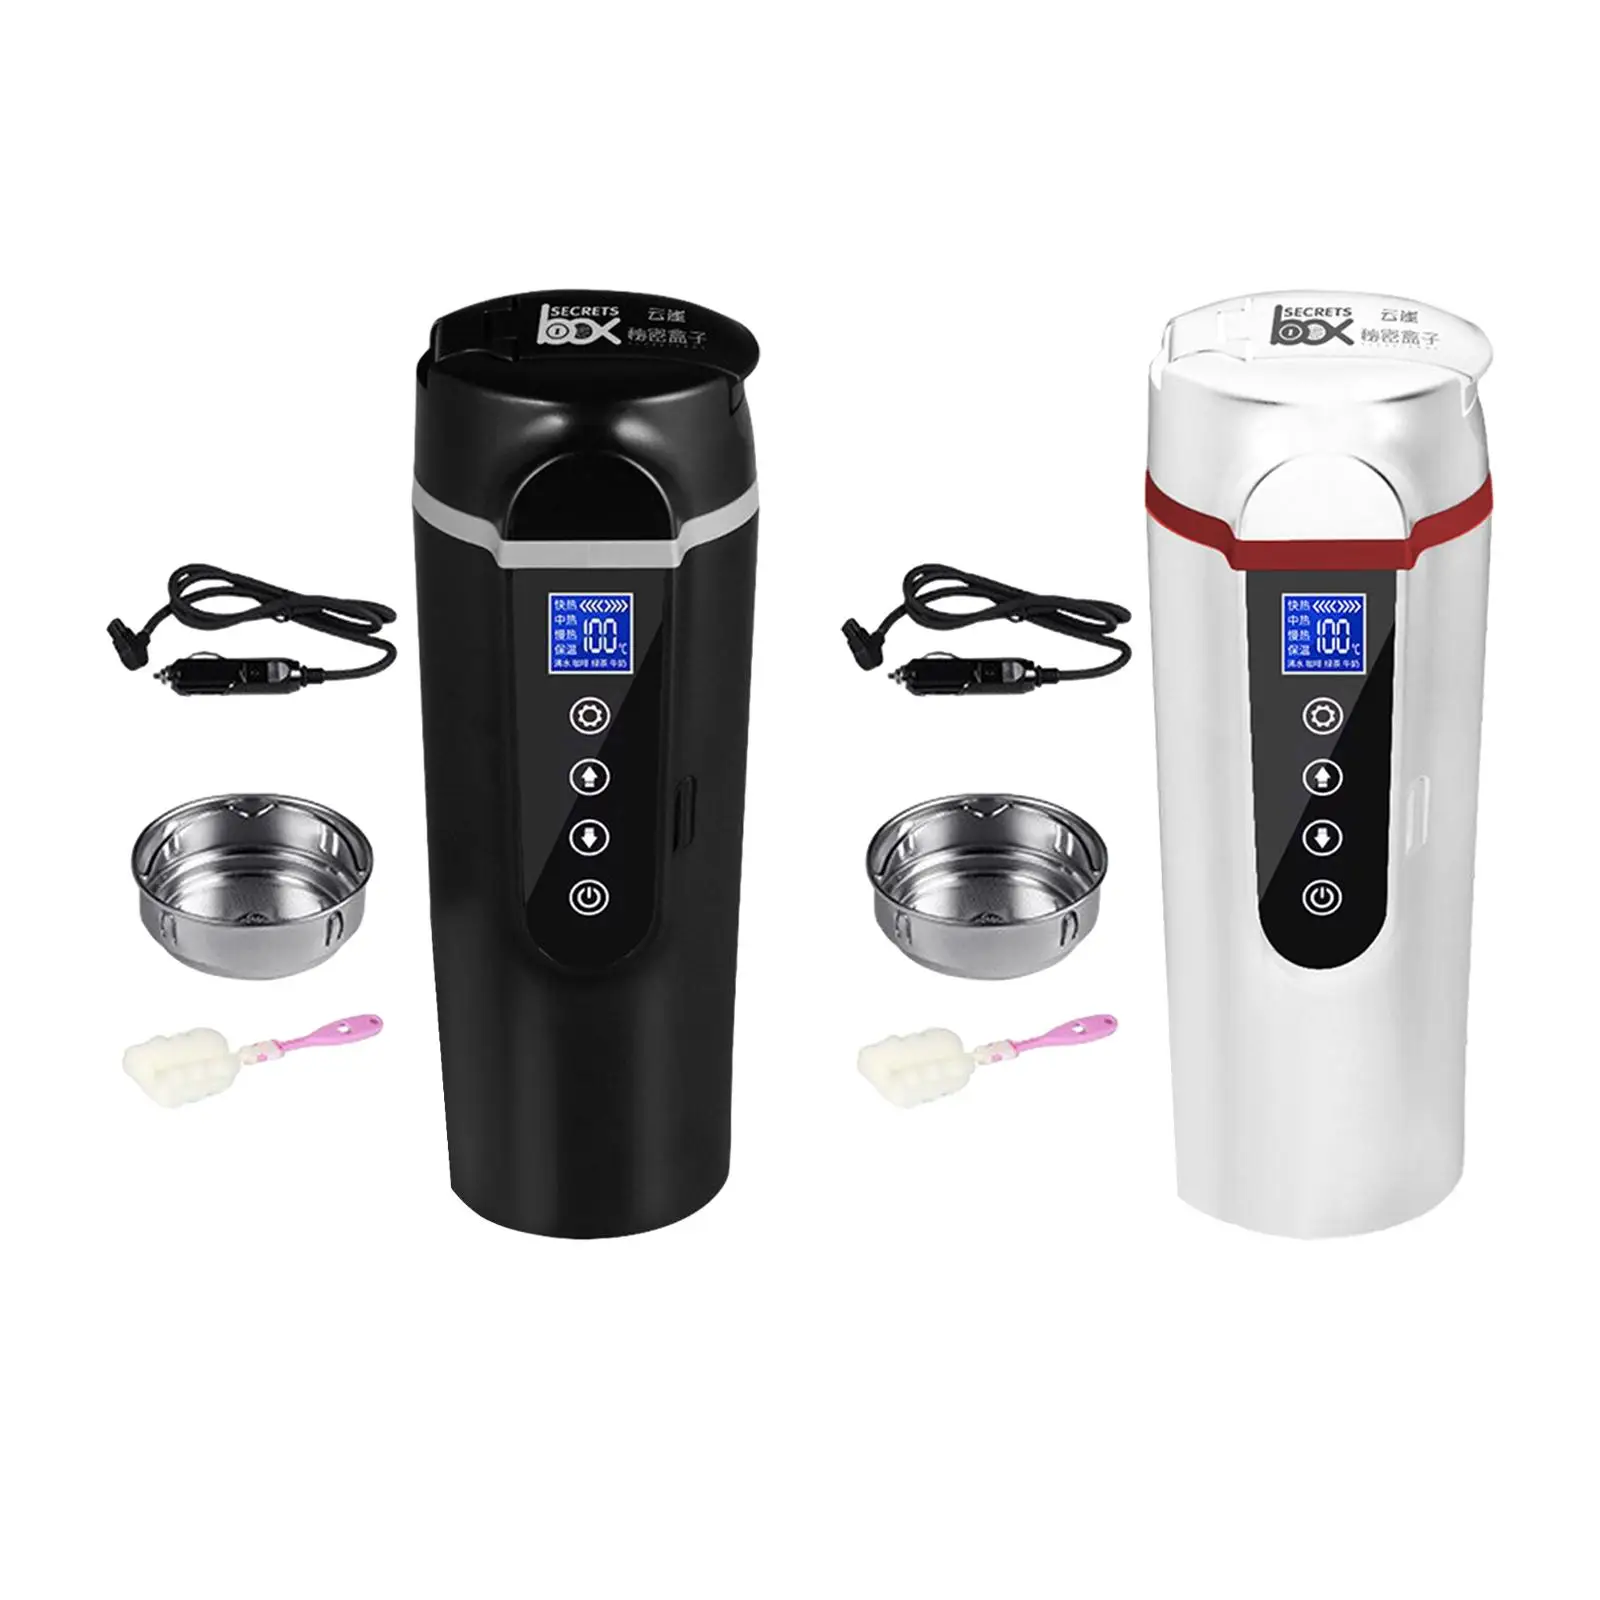 Car Heating Cup Smart Electric Tea Kettle for Camping Vehicles Airplane